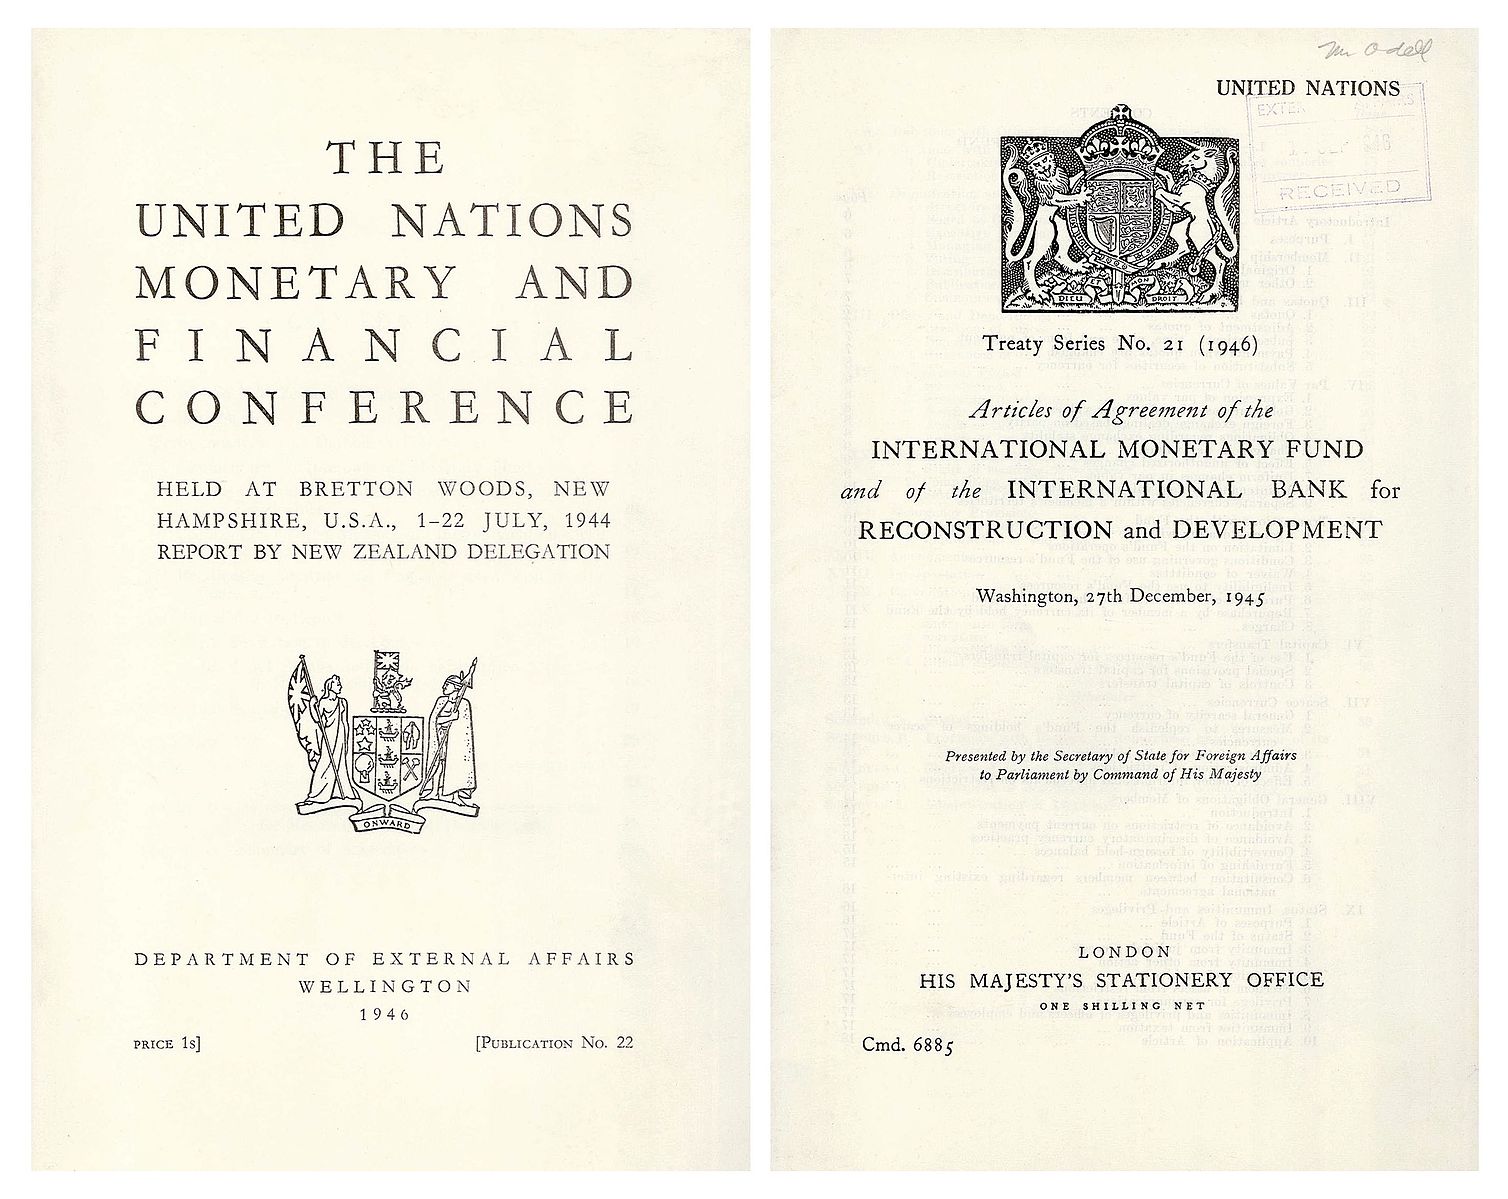 photograph of cover of original program for Bretton Woods conference, 1944